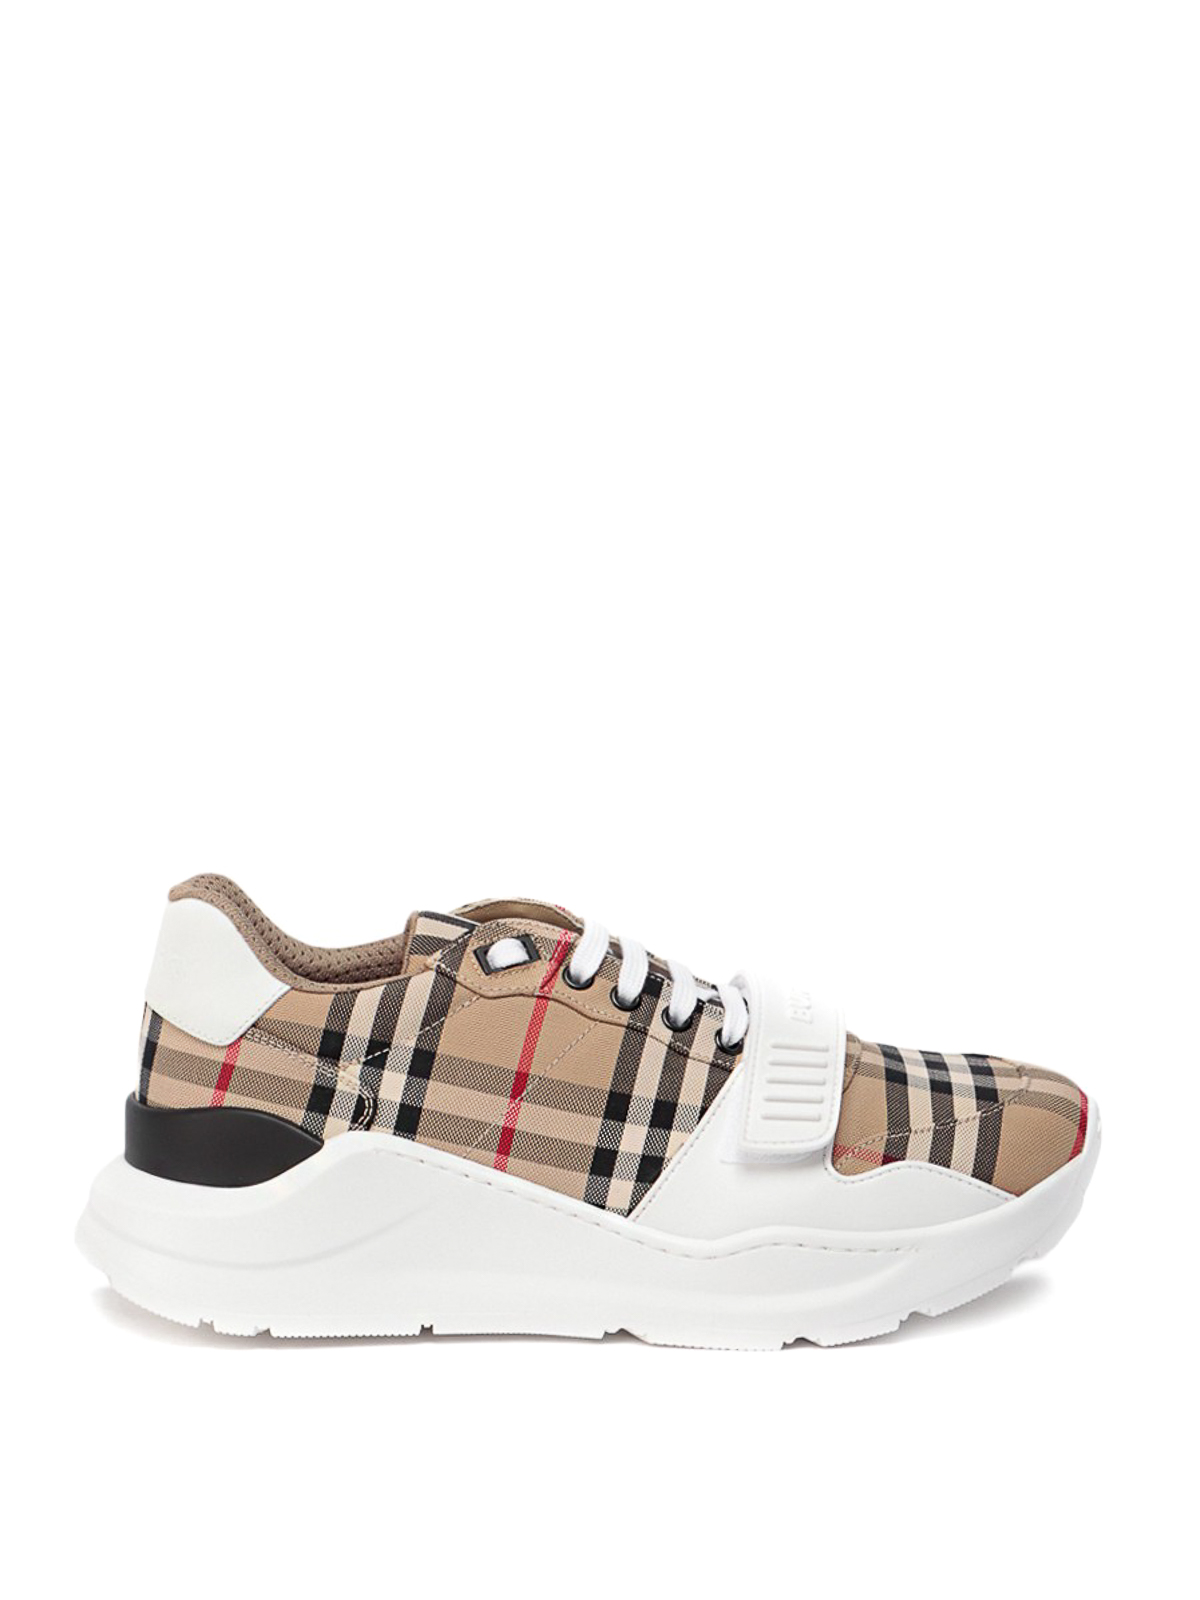 Burberry Sneakers Con Motivo Vintage Check In Beis Oscuro